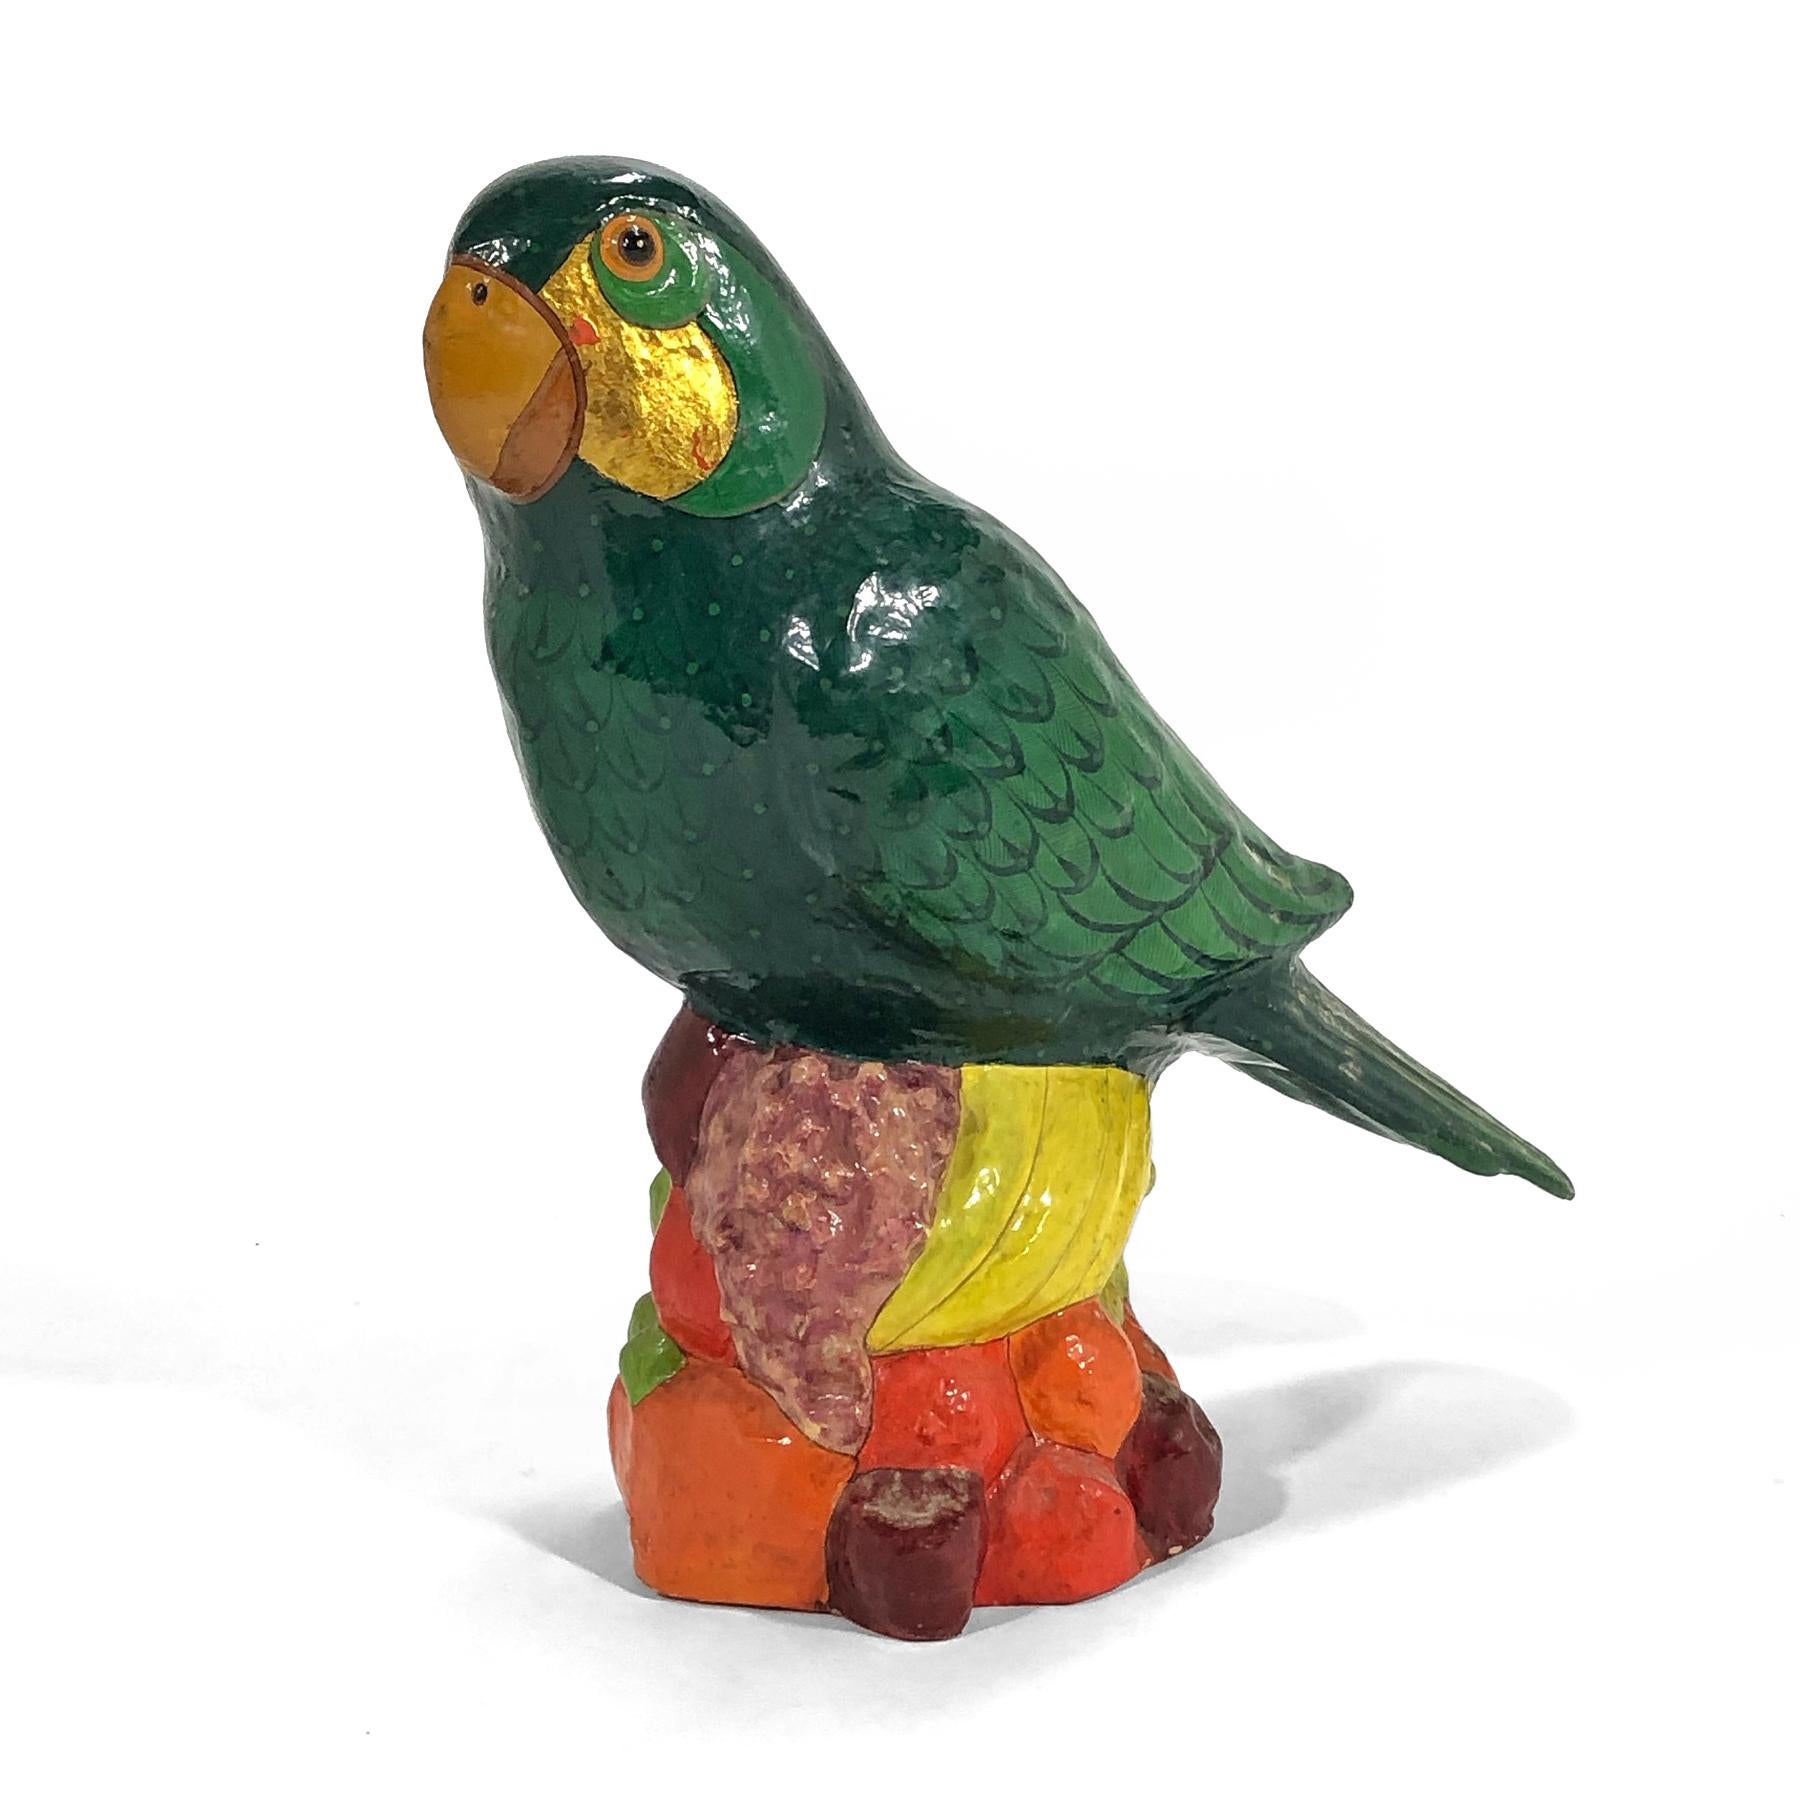 This terrific, oversize sculpture of a parrot by Sergio Bustamante is a joyful piece with it's vivid colors and playful scale.